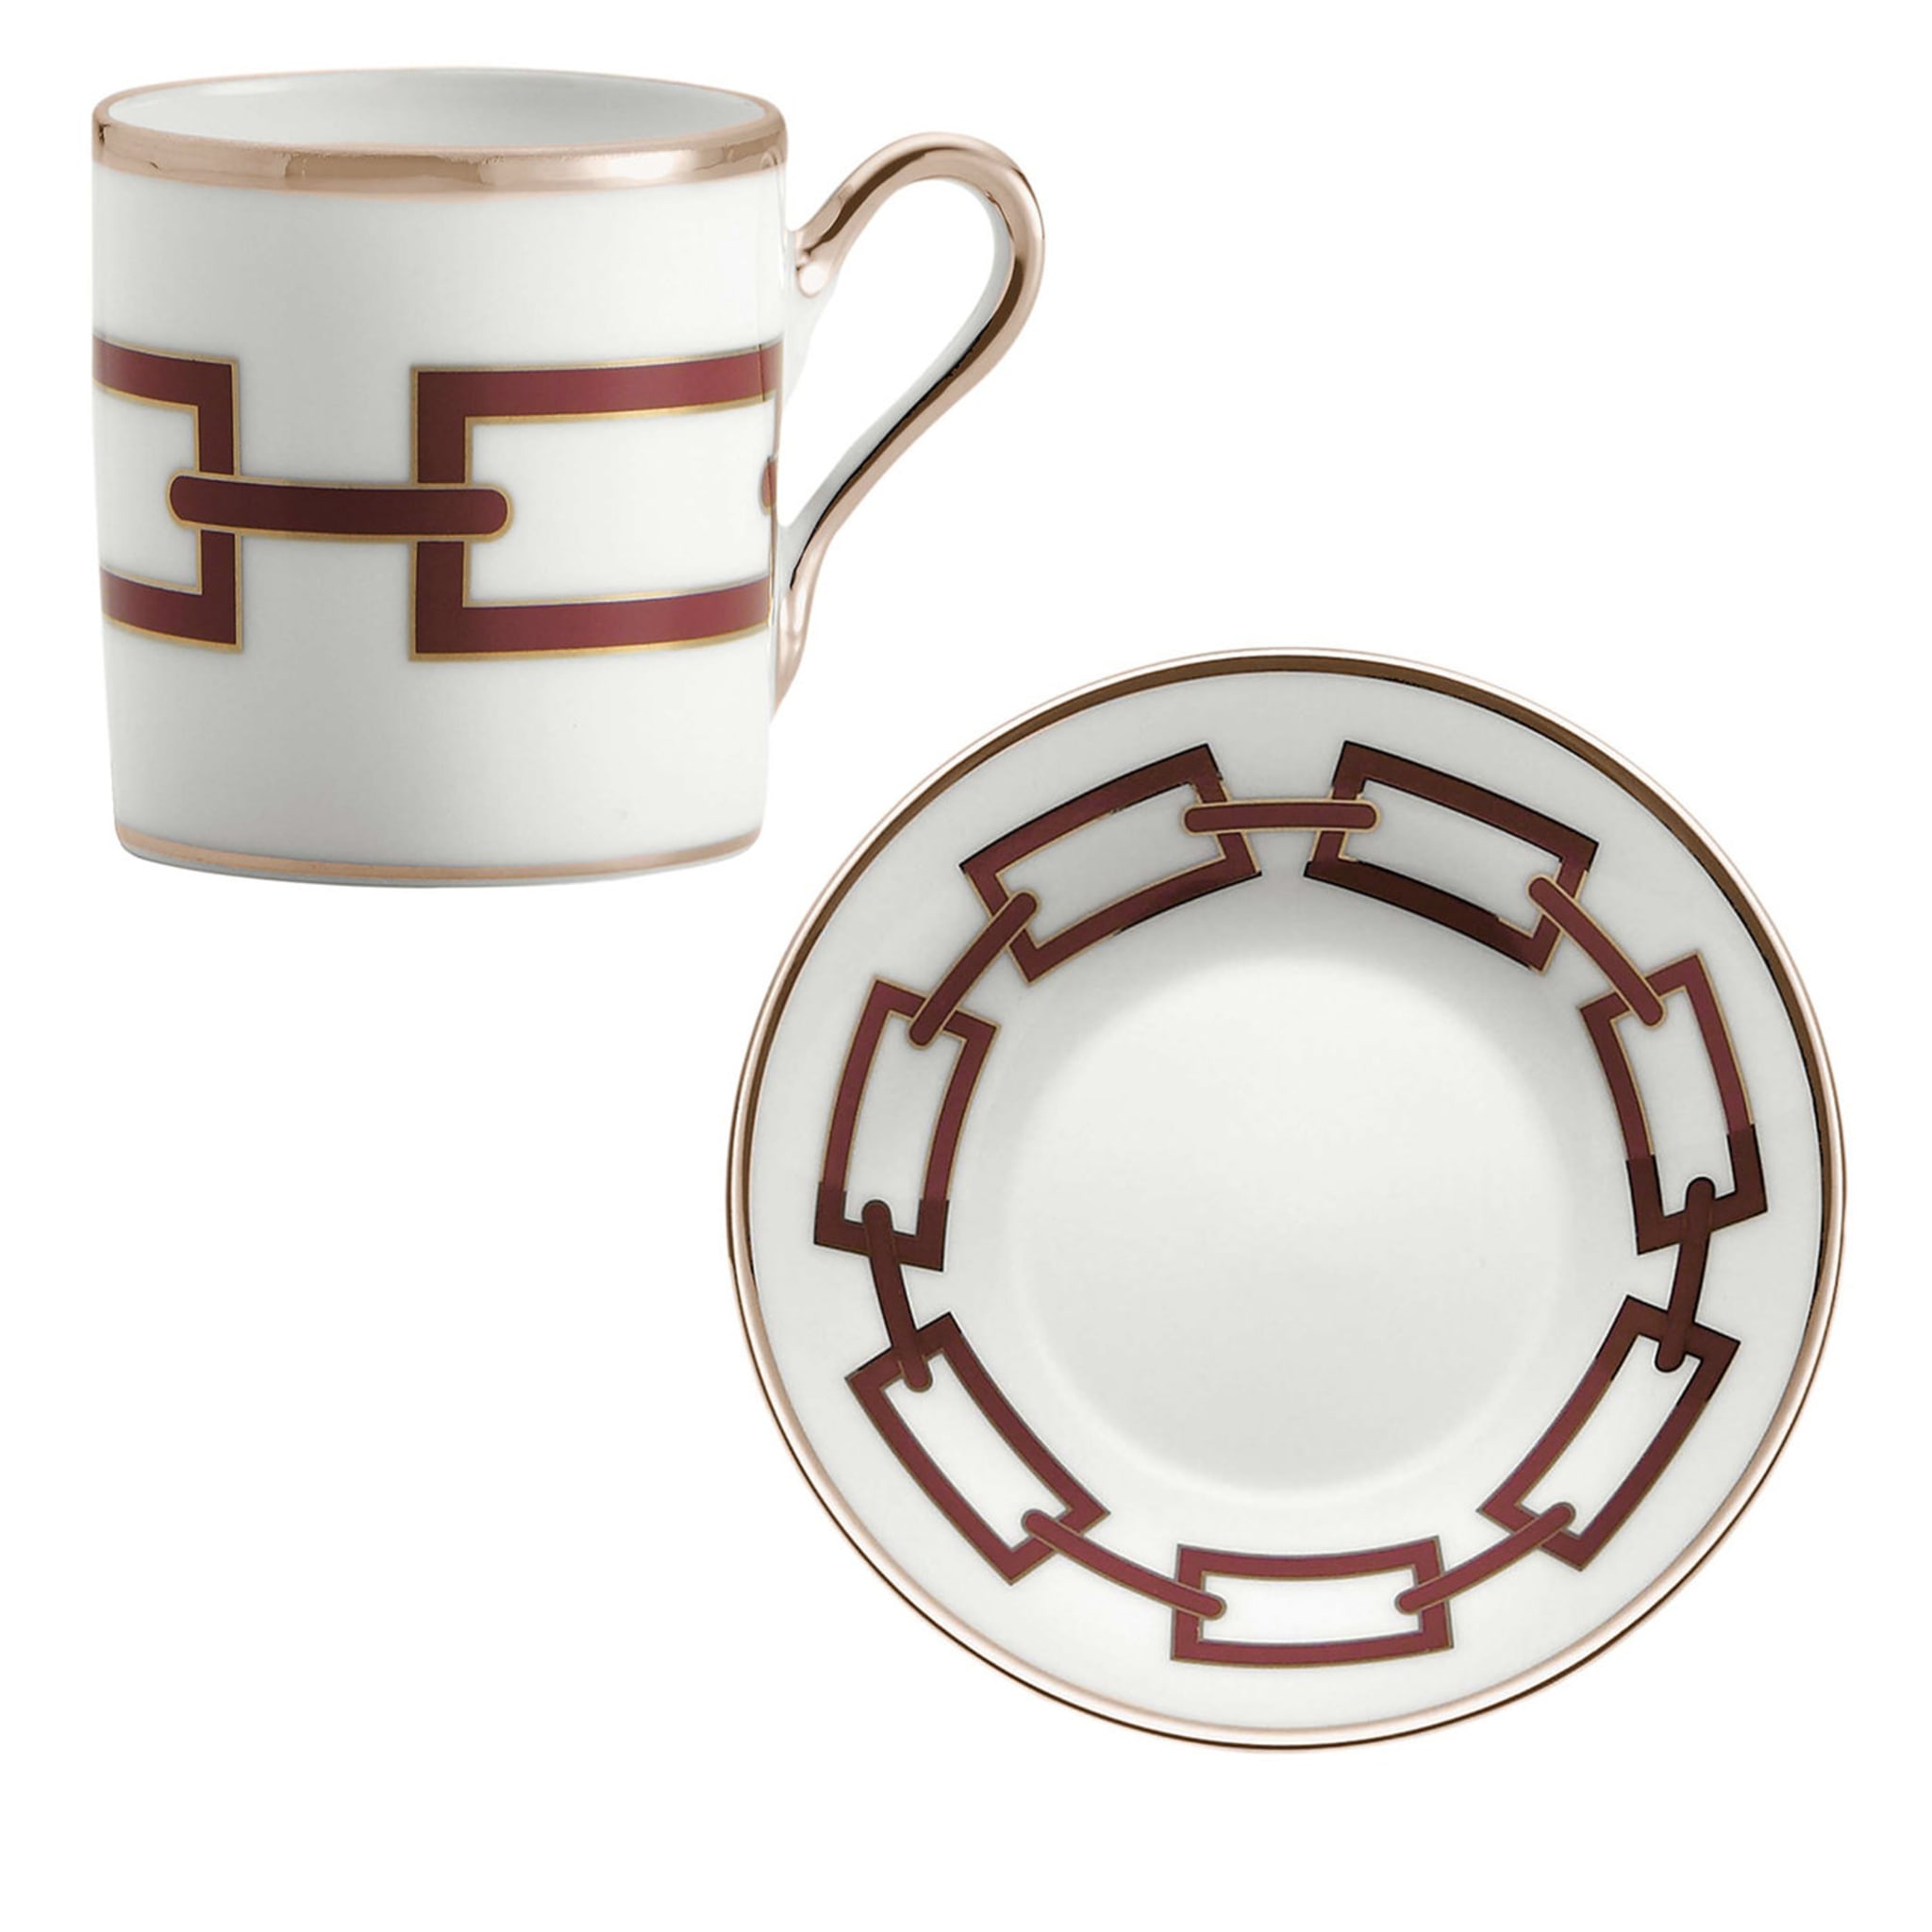 Catene Scarlatto Set of 2 Espresso Cups and Saucers by Gio Ponti  - Main view